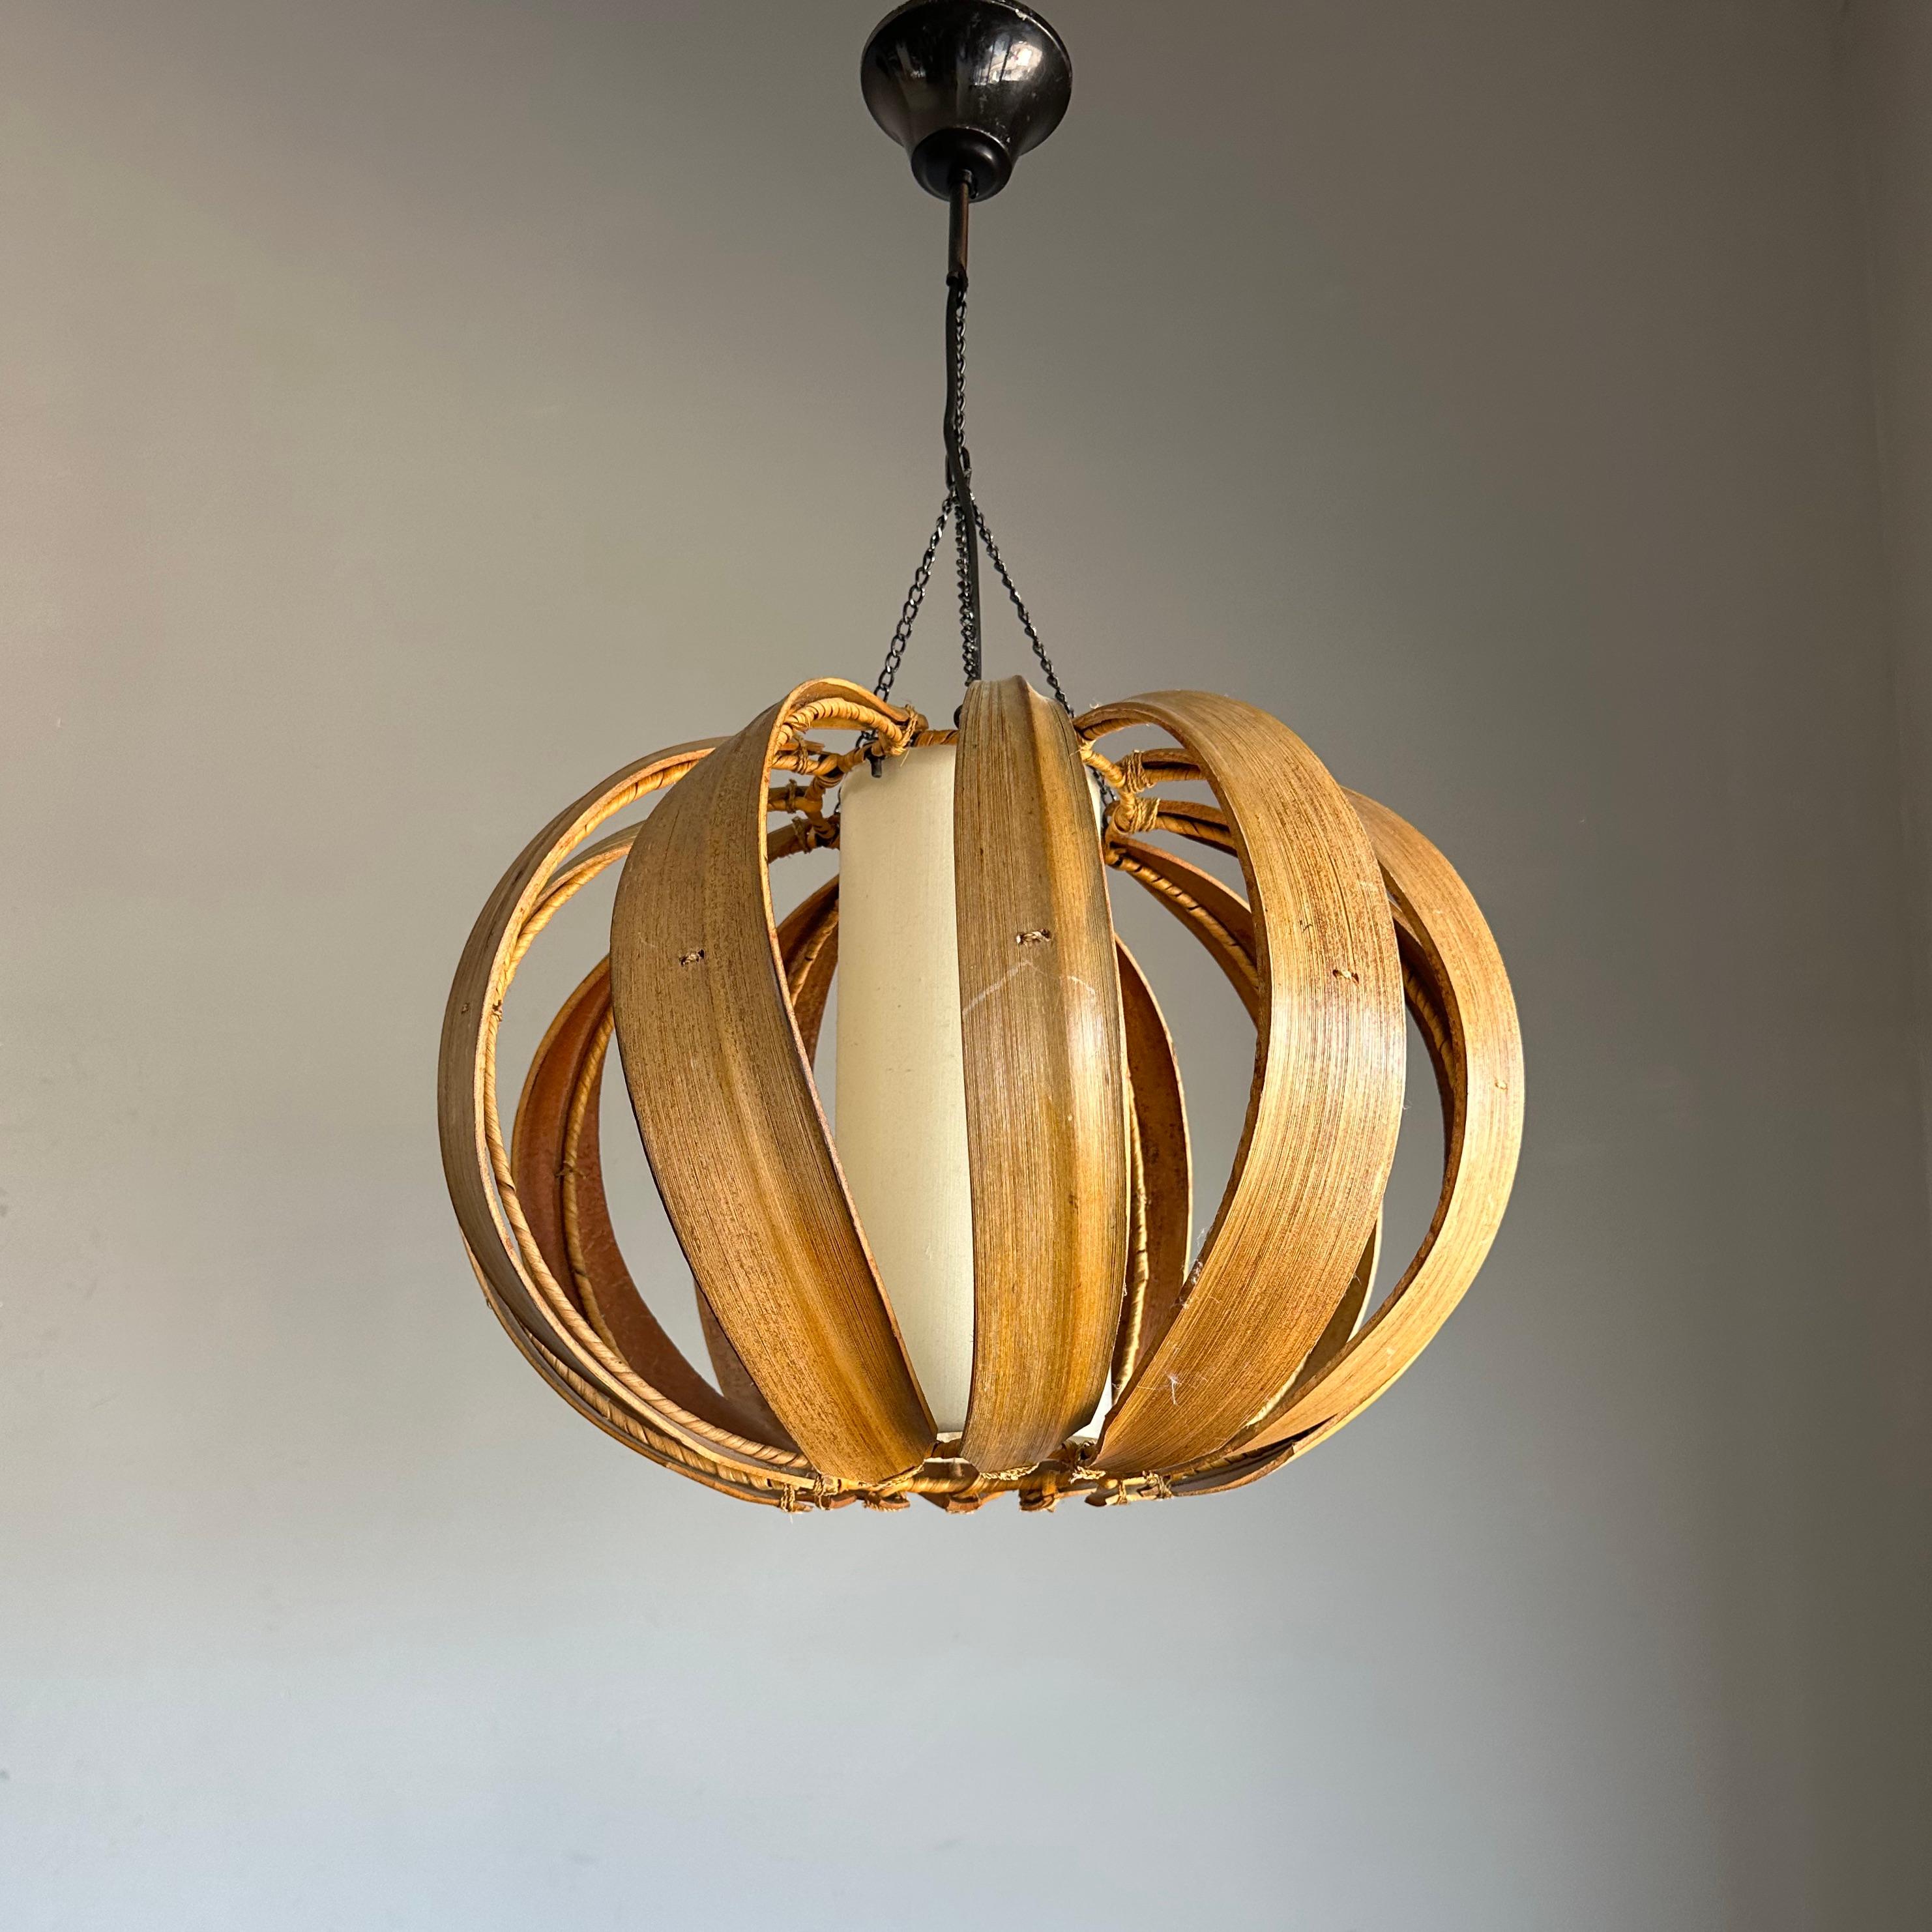 Hand-Carved Handcrafted Mid-Century Modern Coconut Leaf, Wicker and Shade Pendant Light For Sale